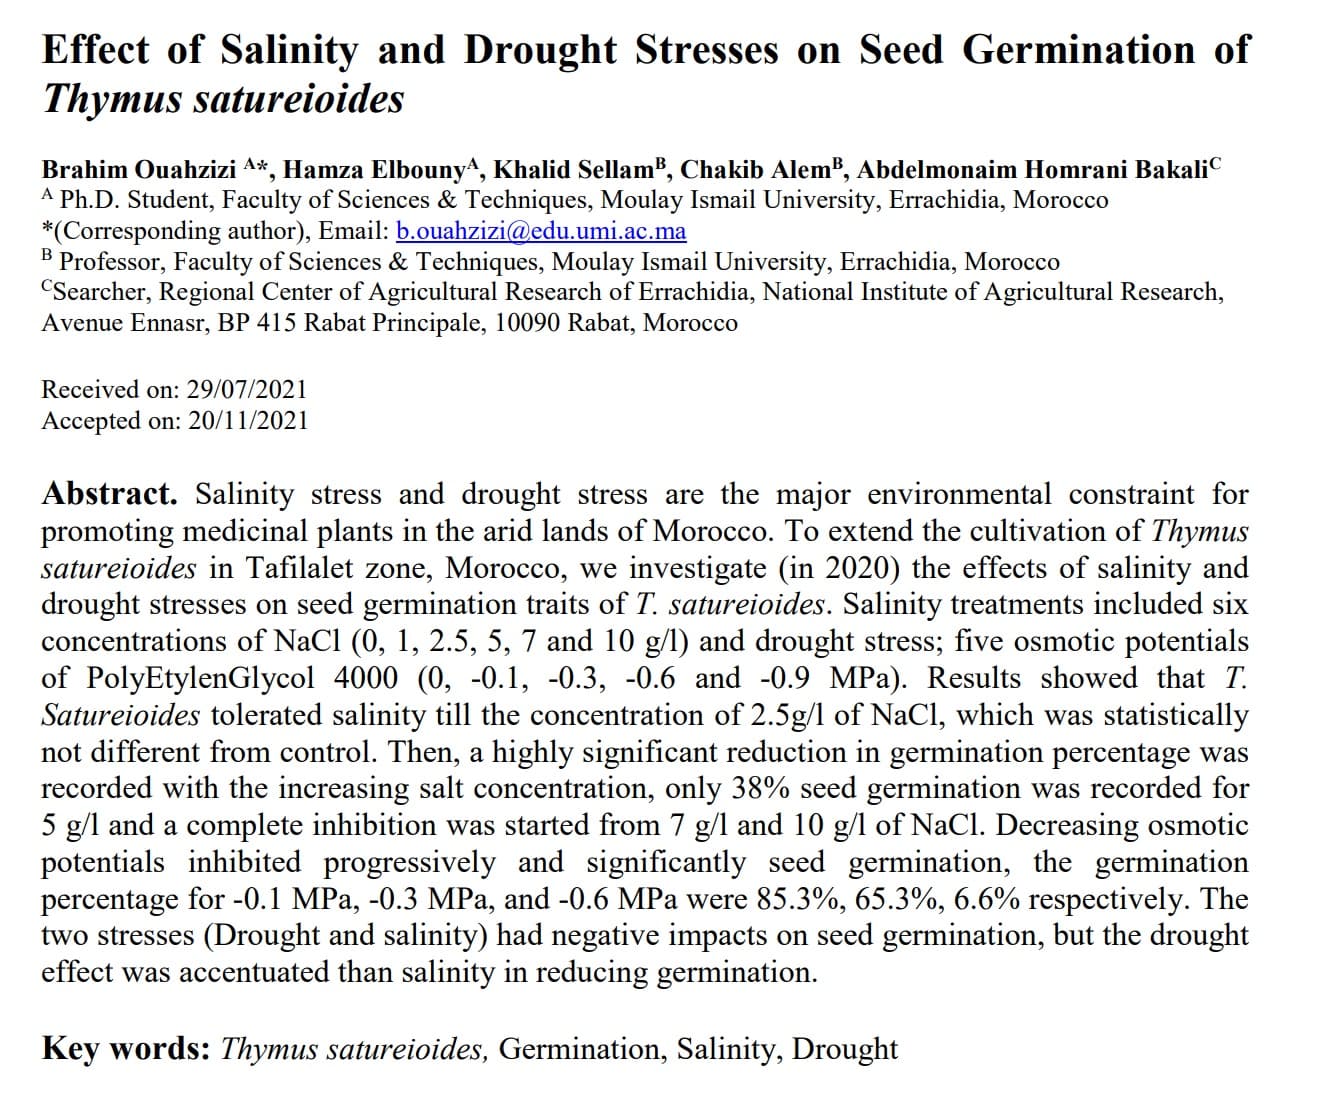 Effect of Salinity and Drought Stresses on Seed Germination of Thymus satureioides